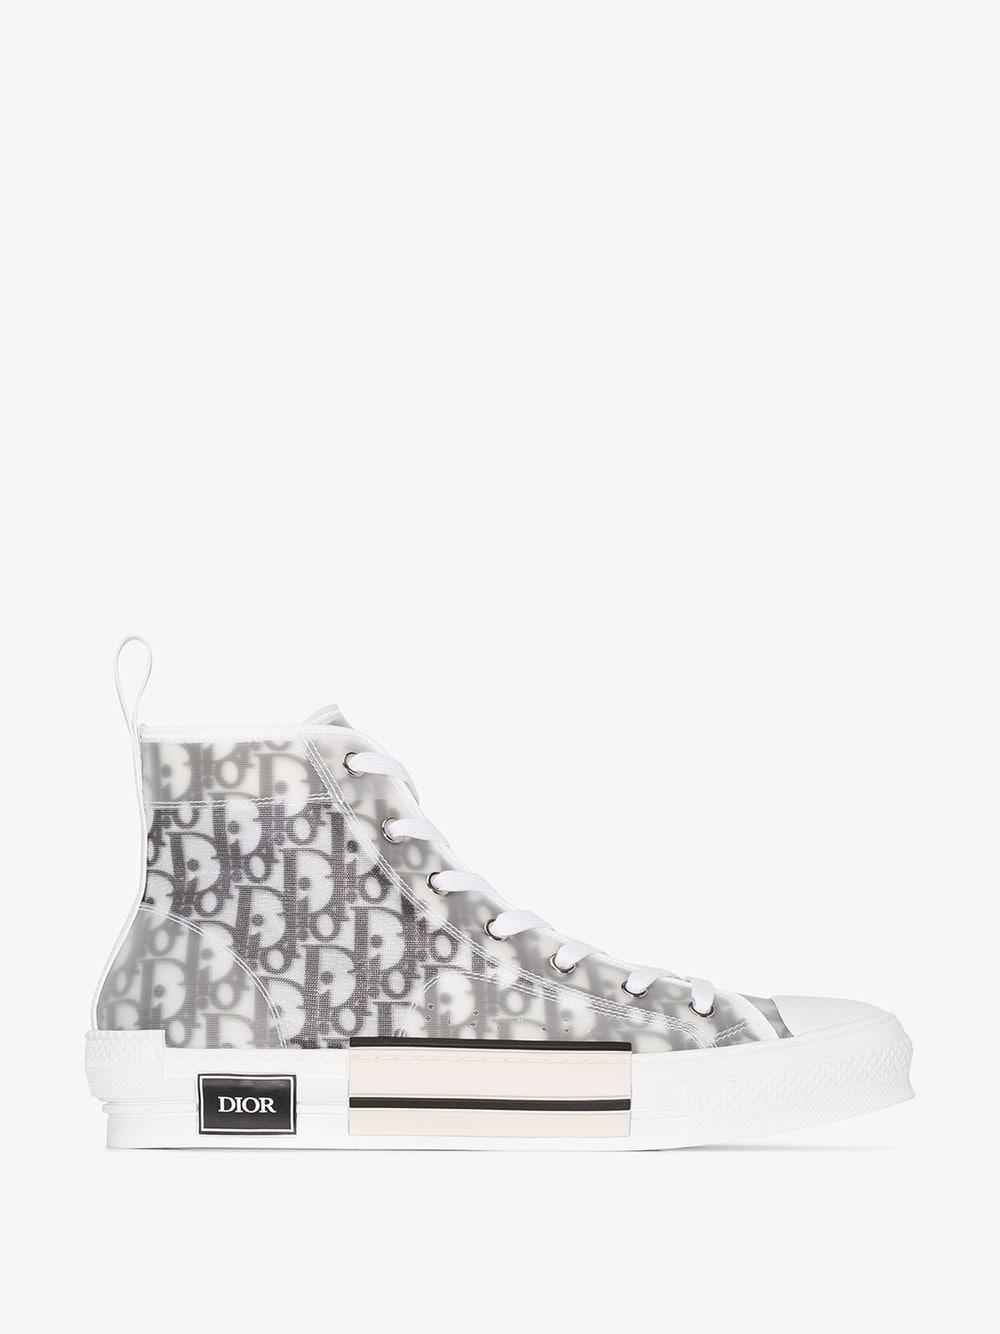 Dior Homme Multicoloured B23 High Top Logo Sneakers for Men | Lyst